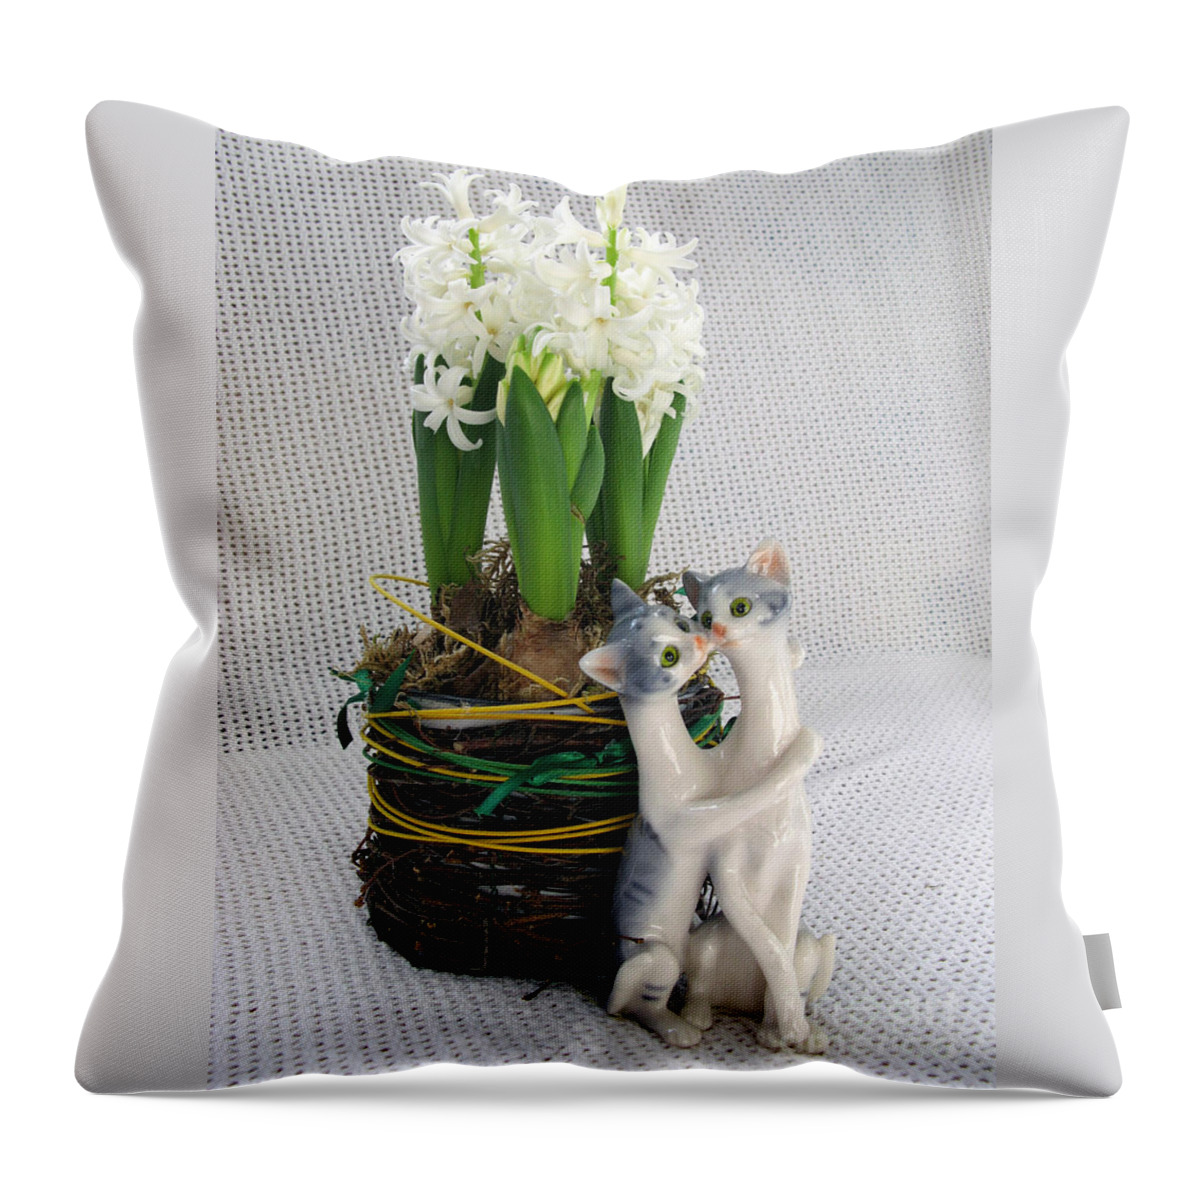 Still Life Throw Pillow featuring the photograph Sweet And Pure Blooming Love. Still life composition by Ausra Huntington nee Paulauskaite